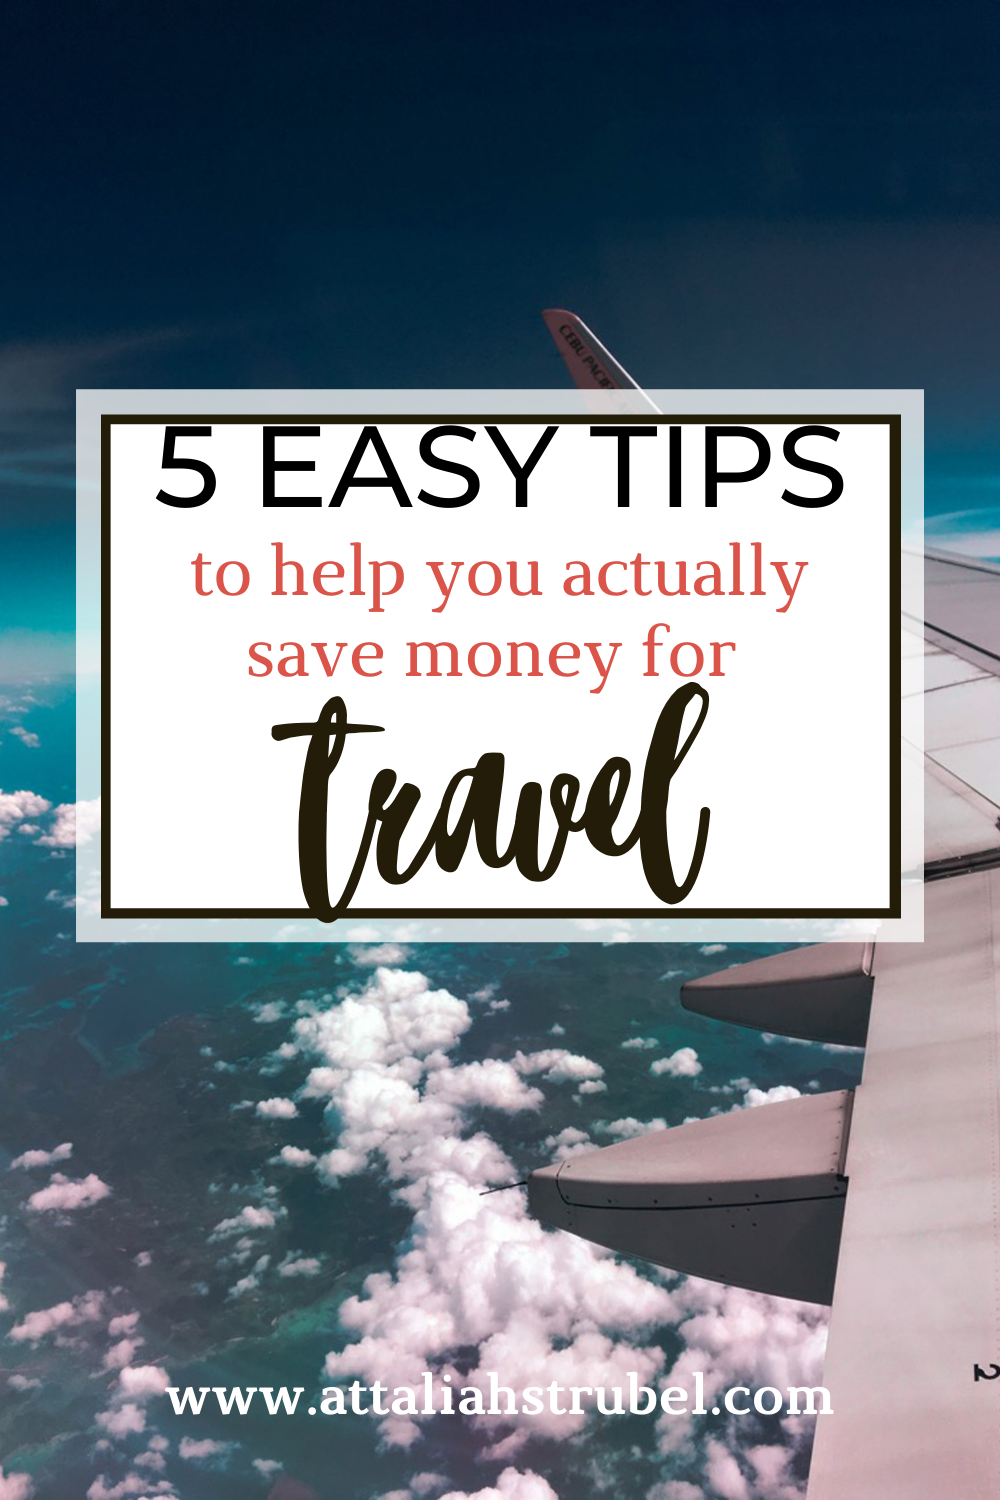 5 easy tips to help you actually save money for travel